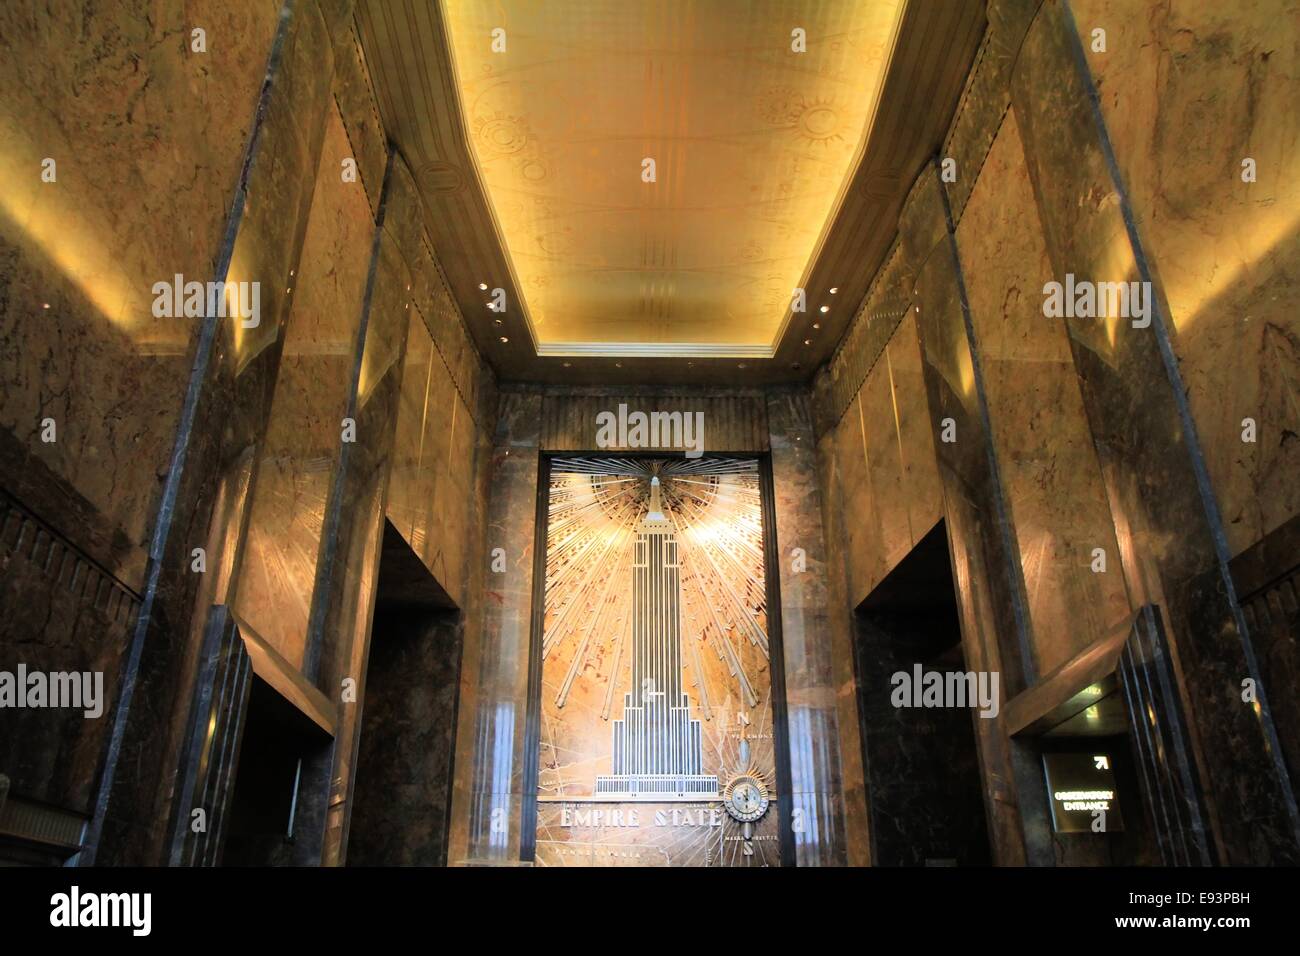 Shiny art deco mural in the lobby of the Empire State Building, New York City, USA Stock Photo